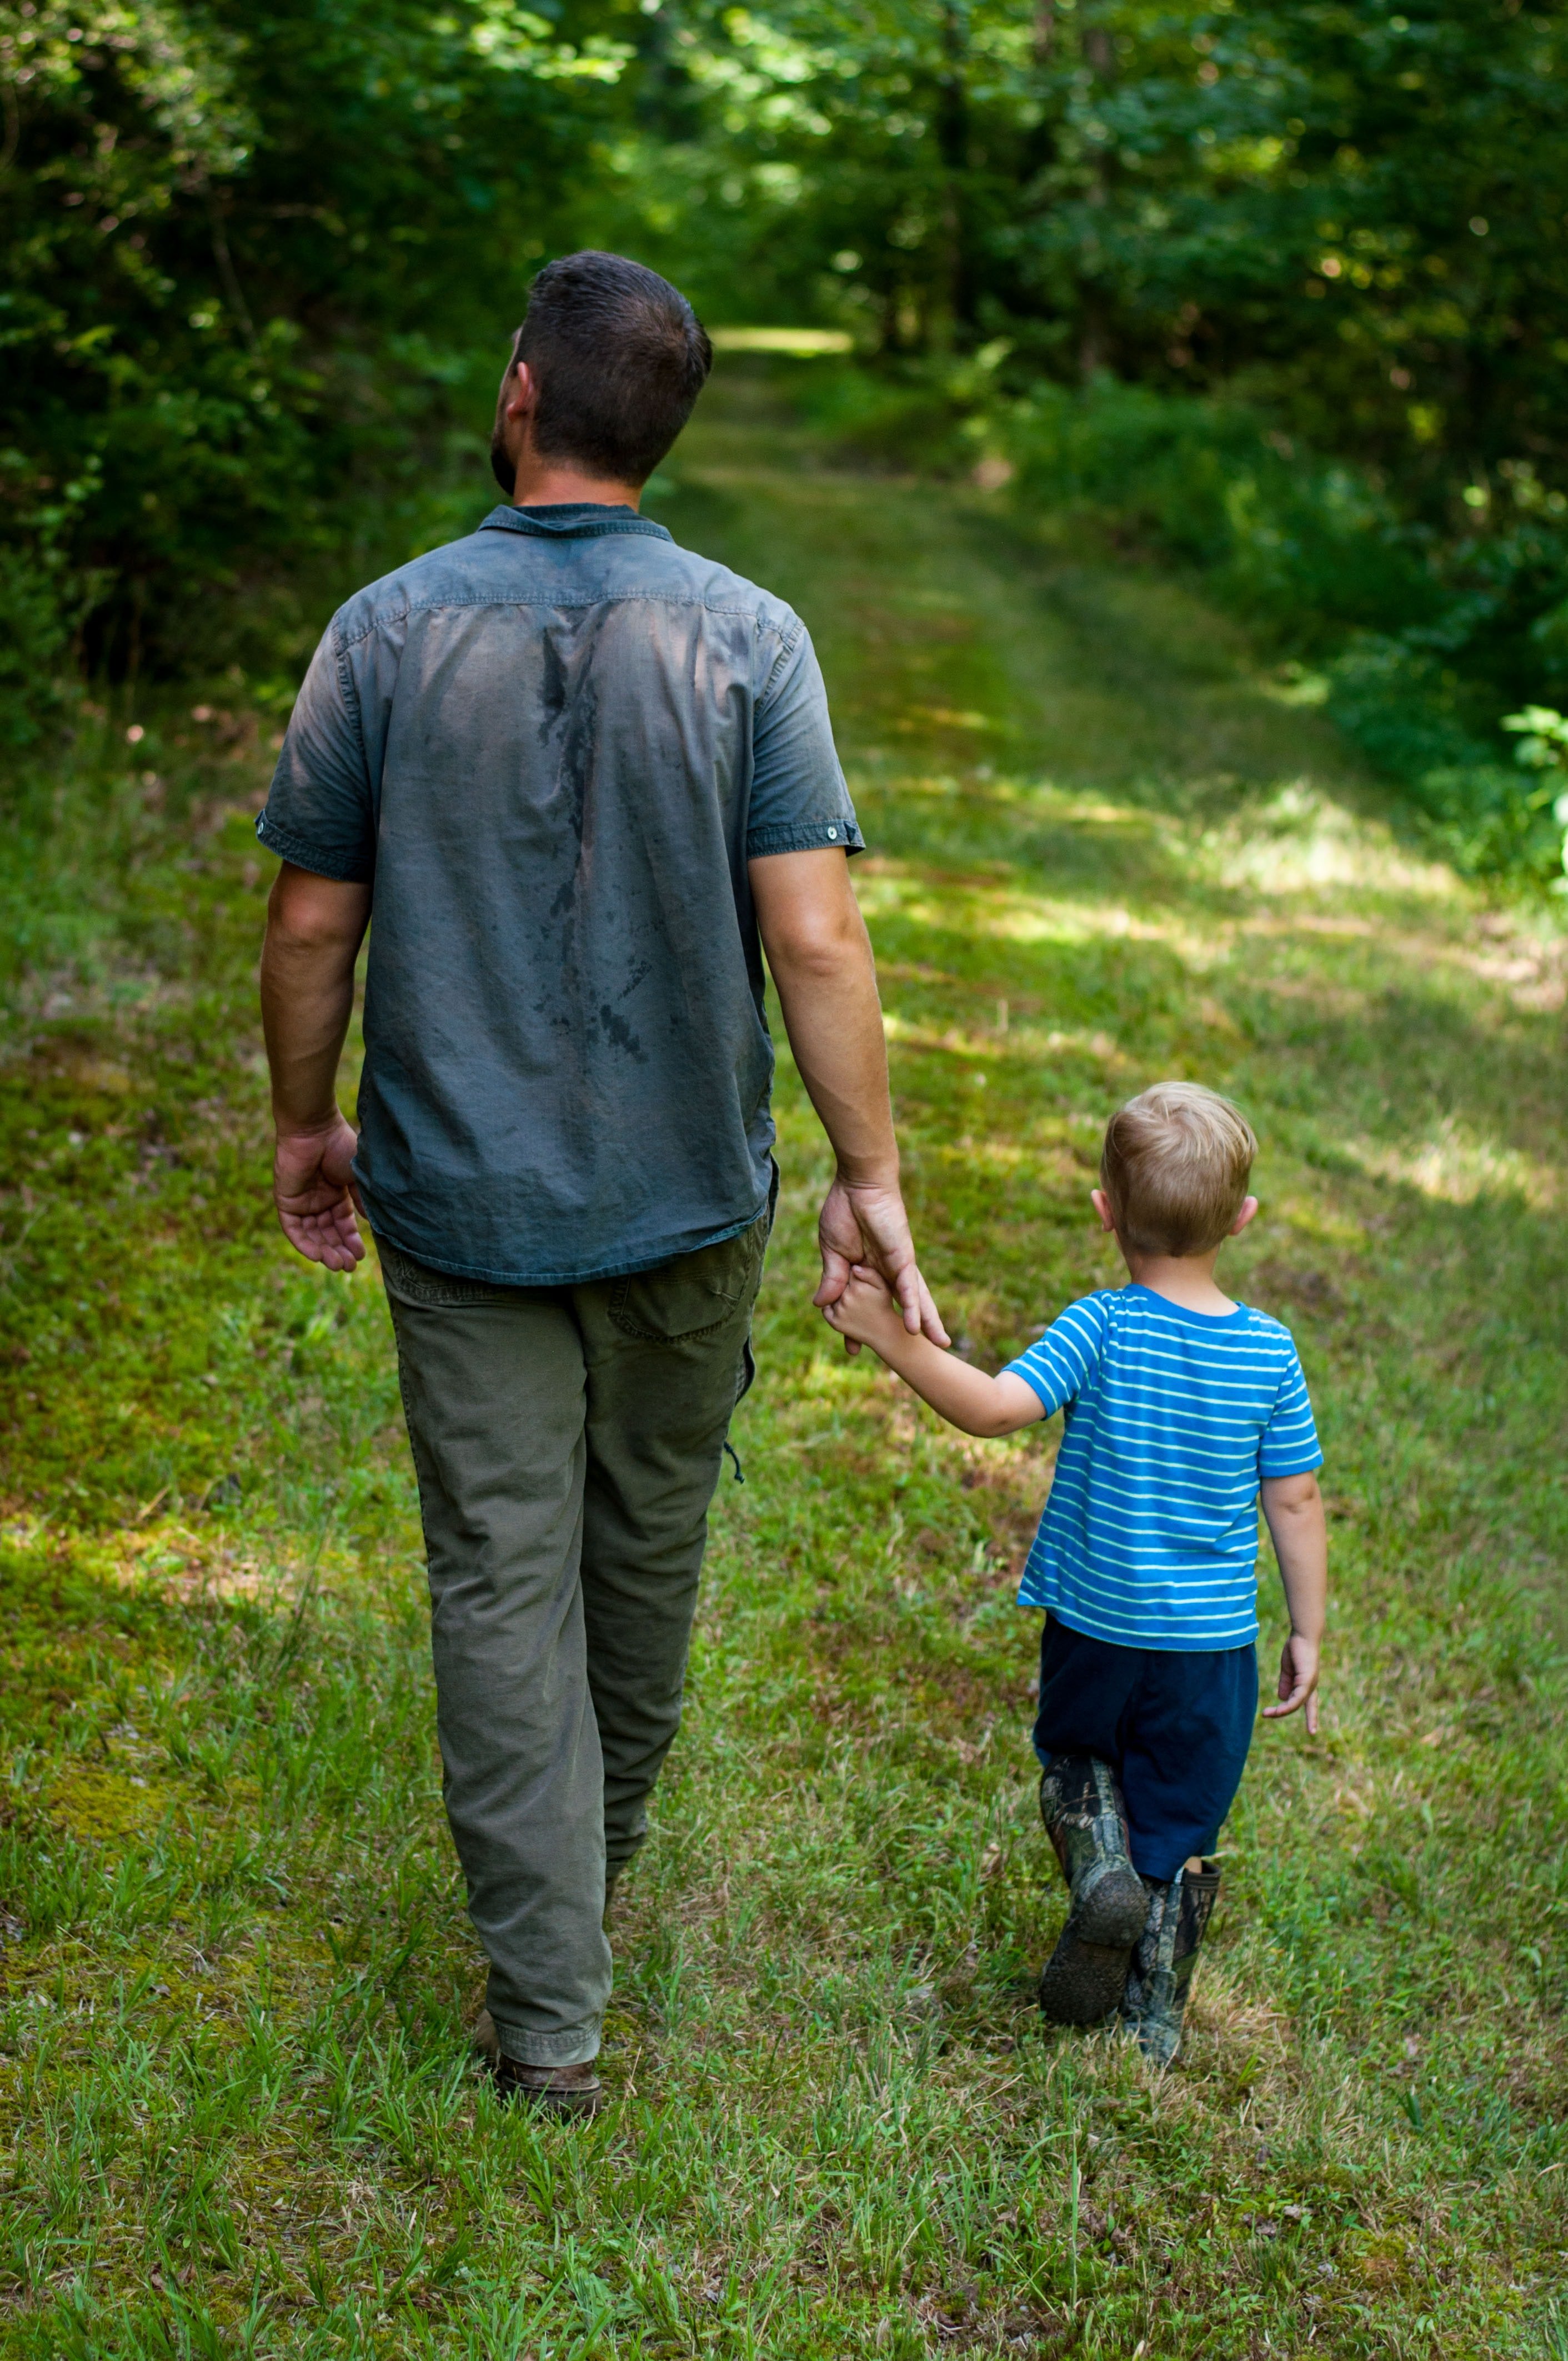 Every Saturday afternoon, Jimmy went to the park with his dad. | Source: Unsplash